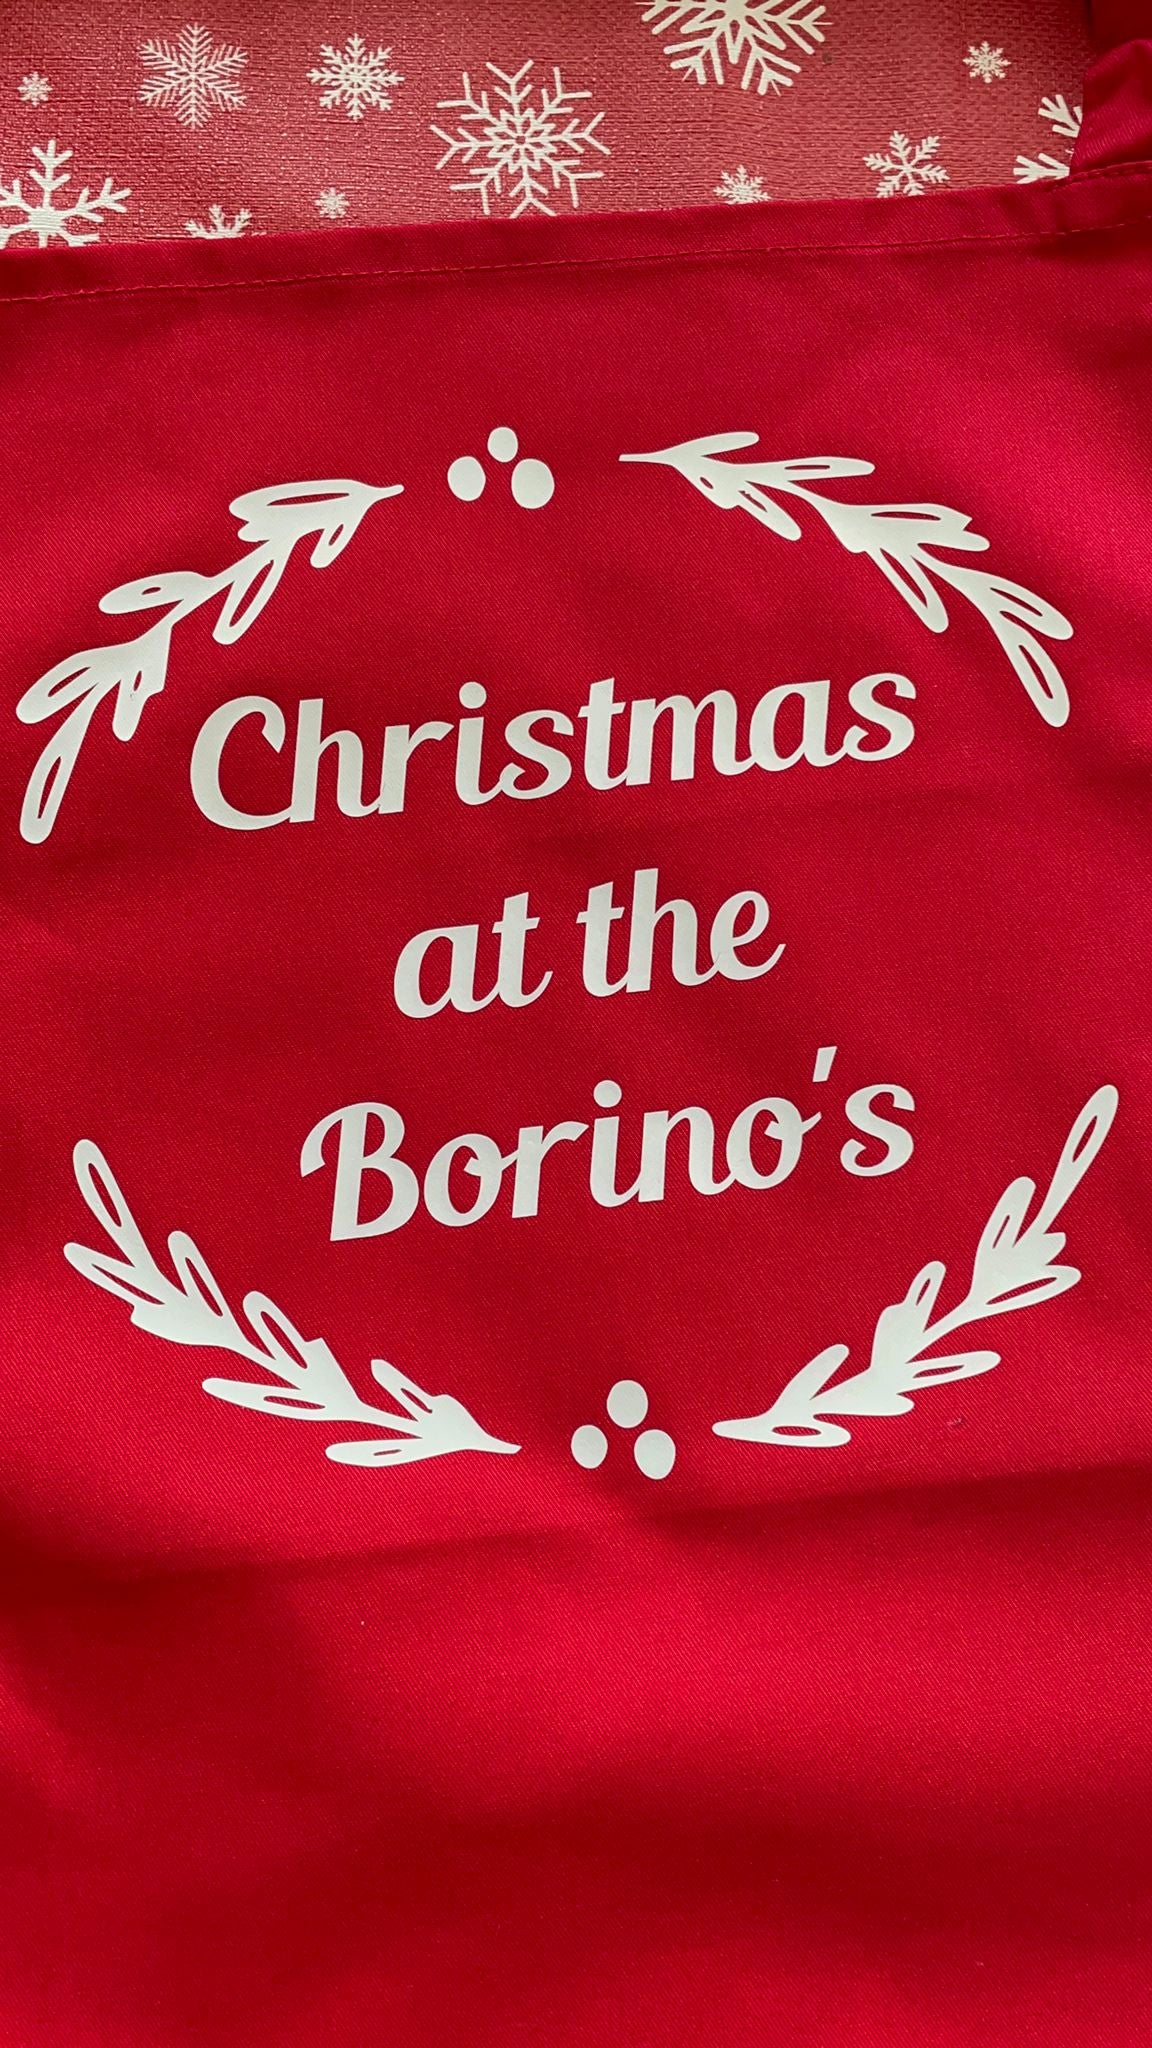 Christmas Printed apron, personalised with family name. High quality